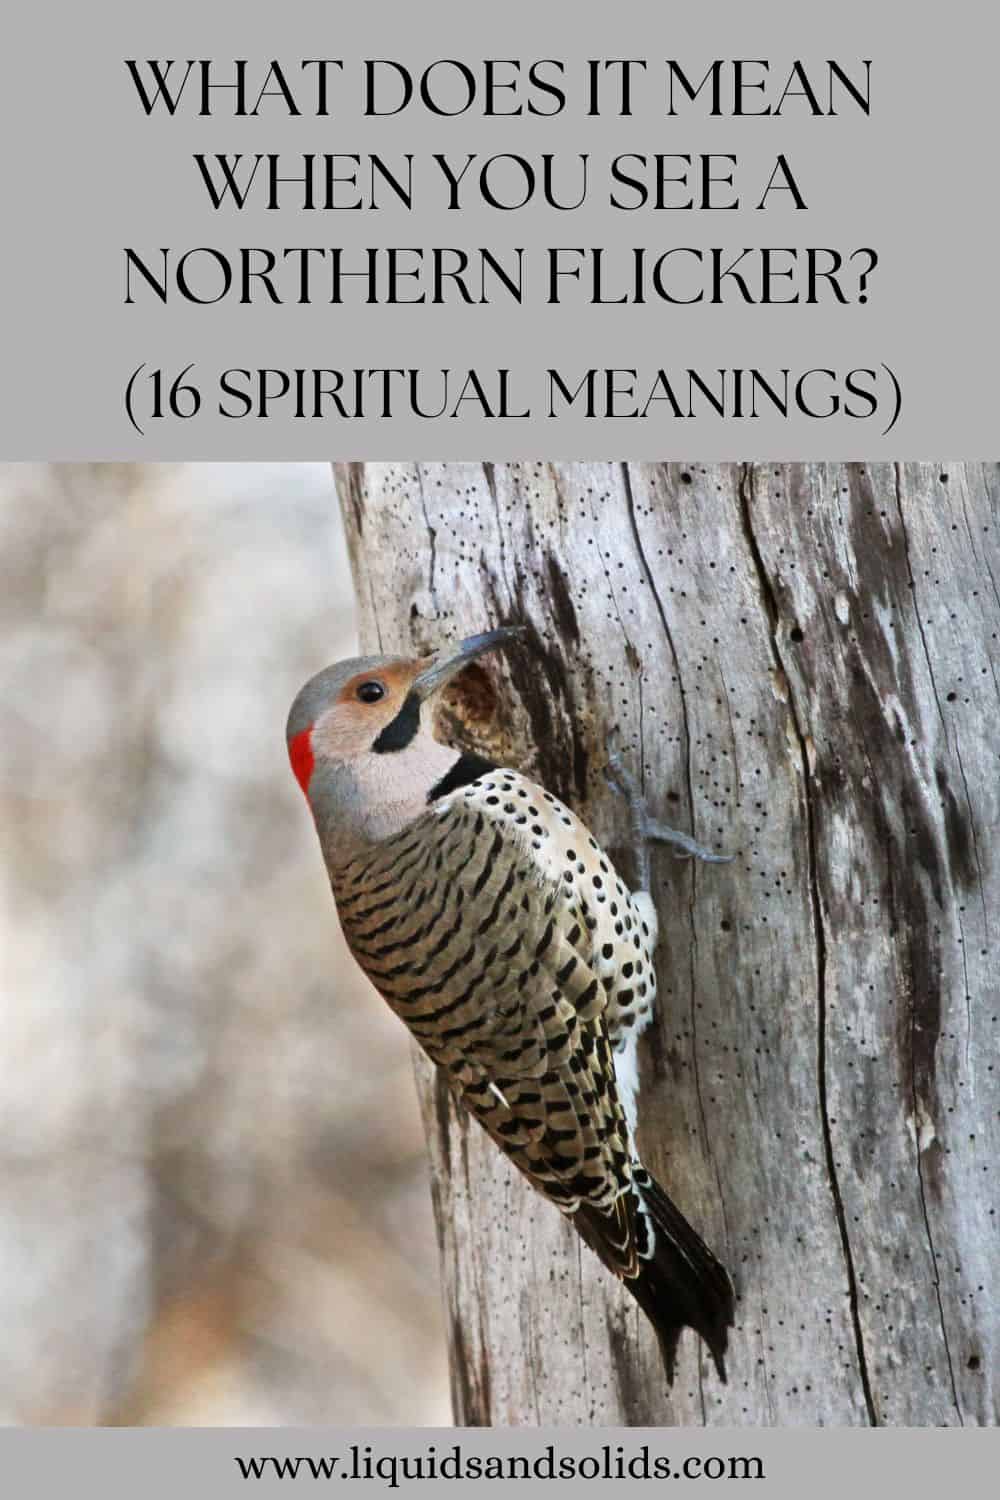 What Does It Mean When You See a Northern Flicker? (16 Spiritual Meanings)